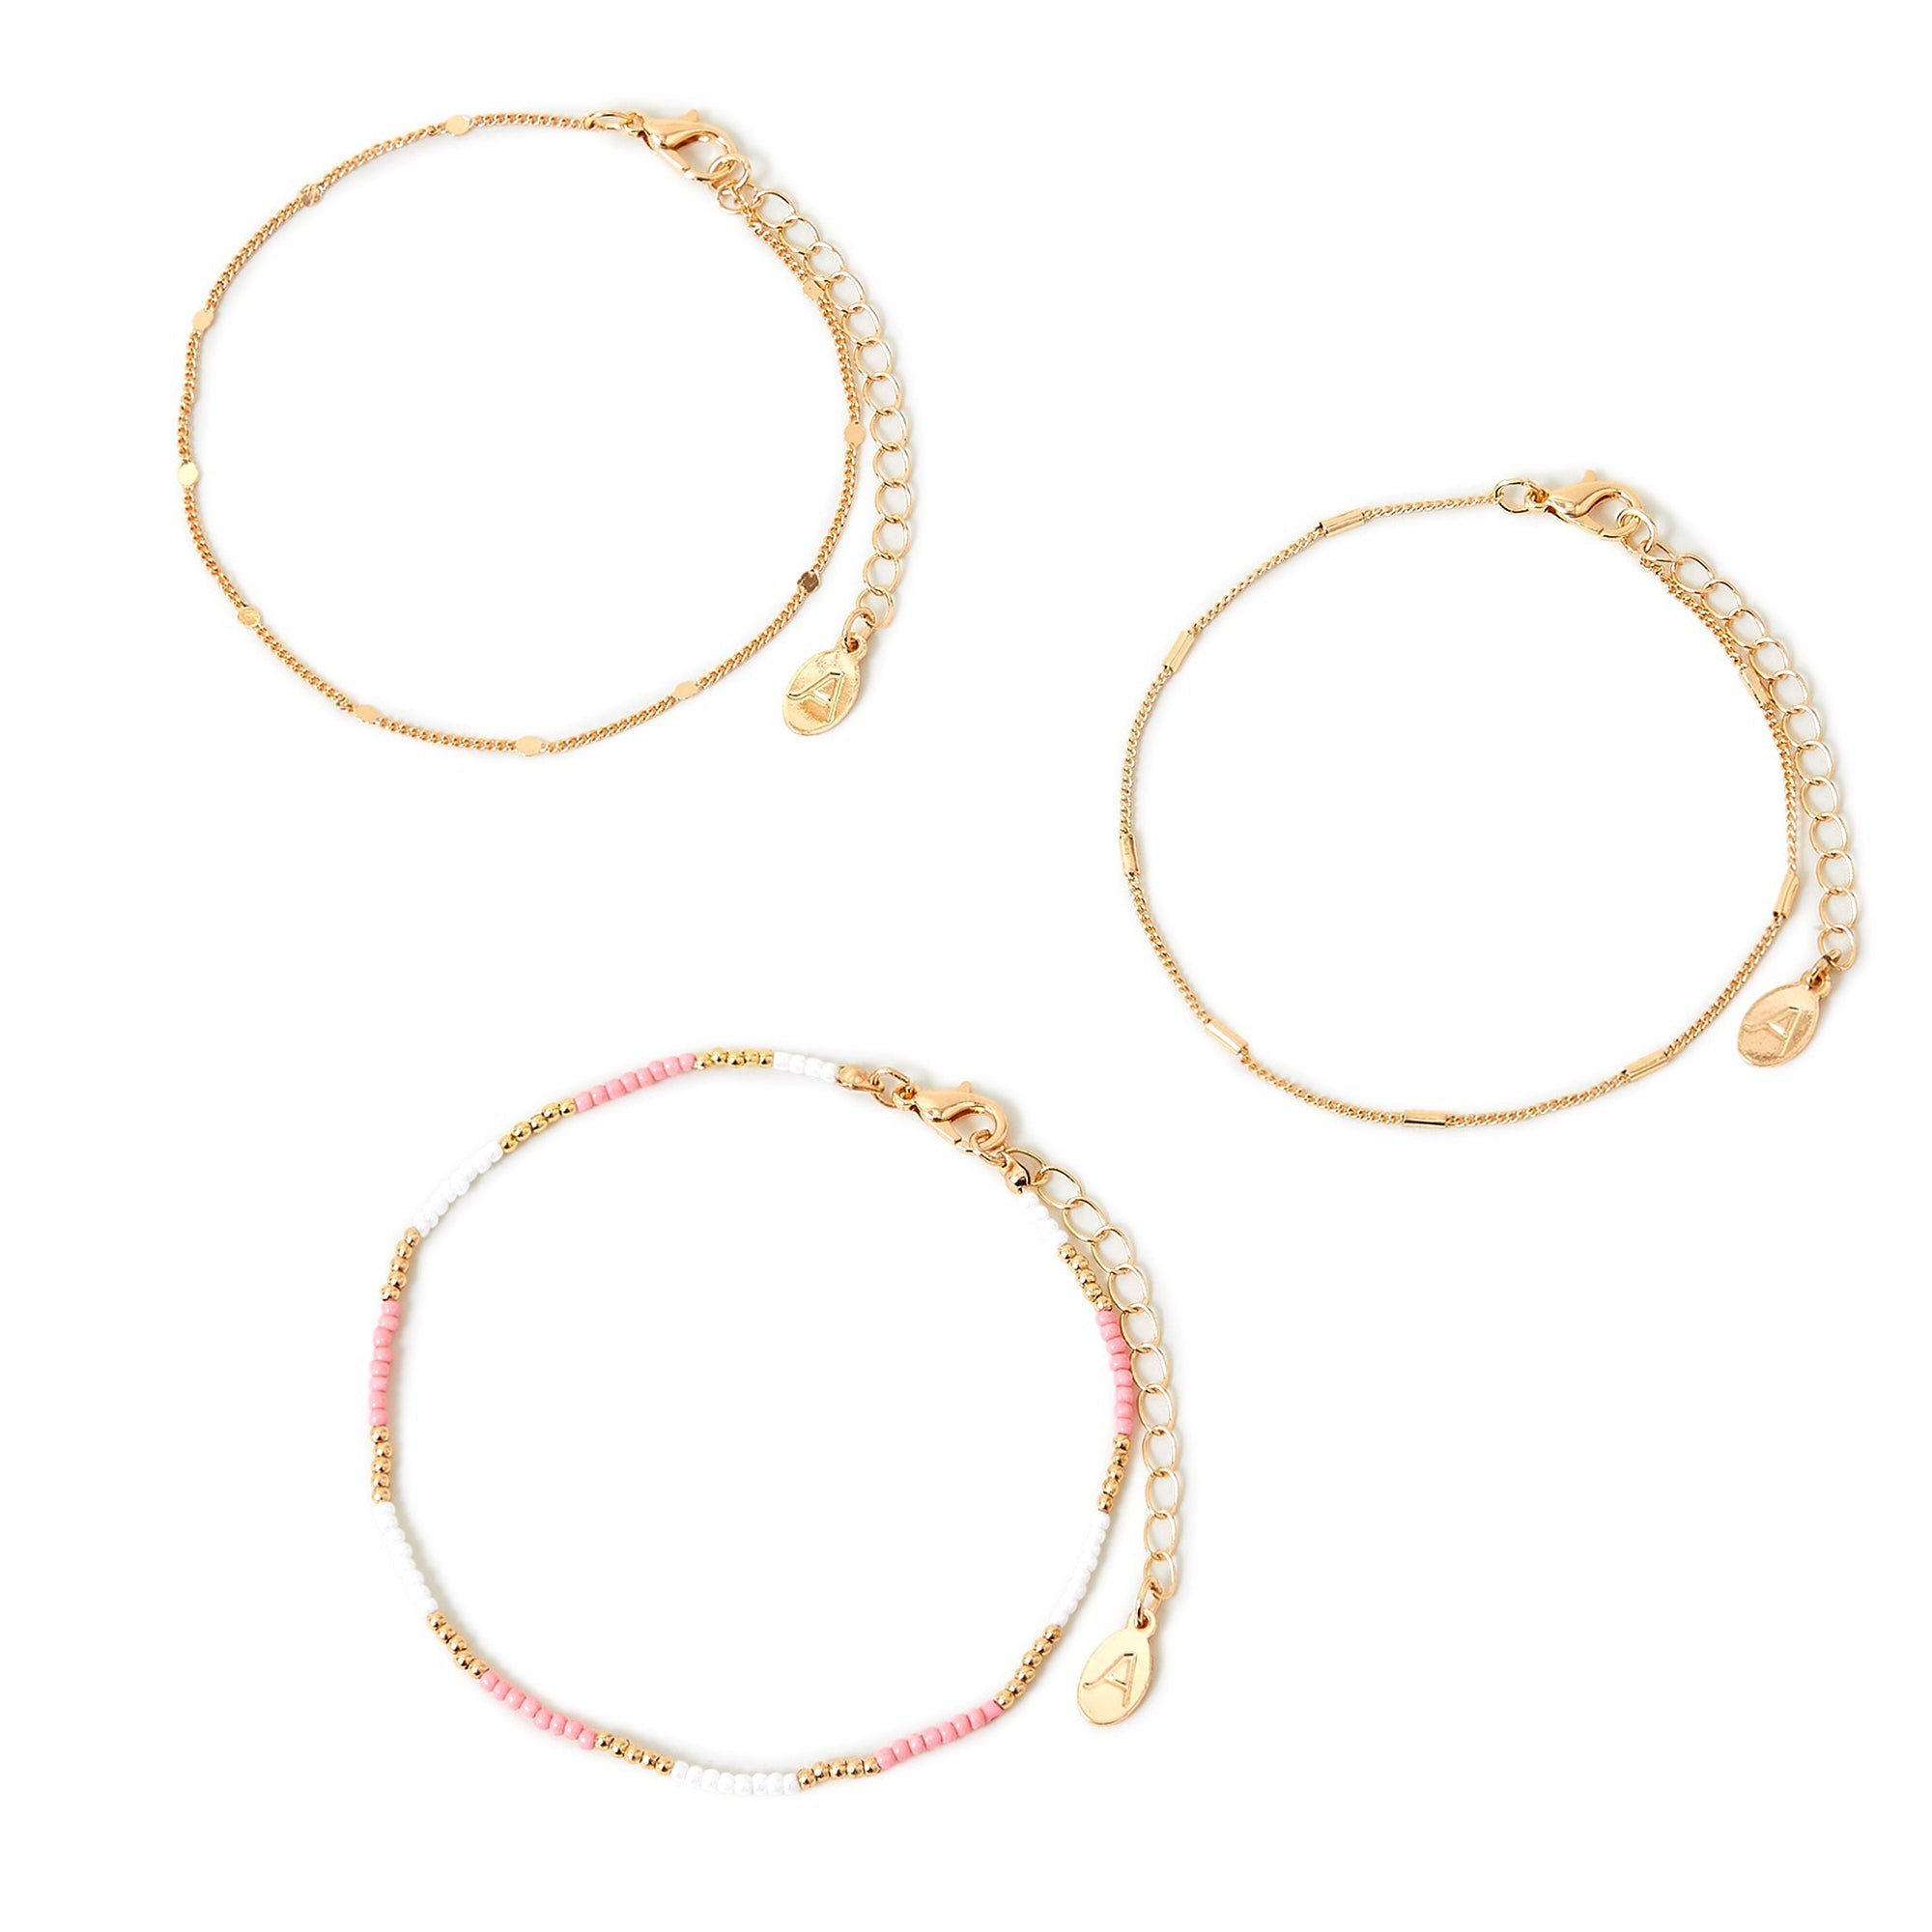 Accessorize London Women's Gold Bead And Chain Anklets Pack Of 3